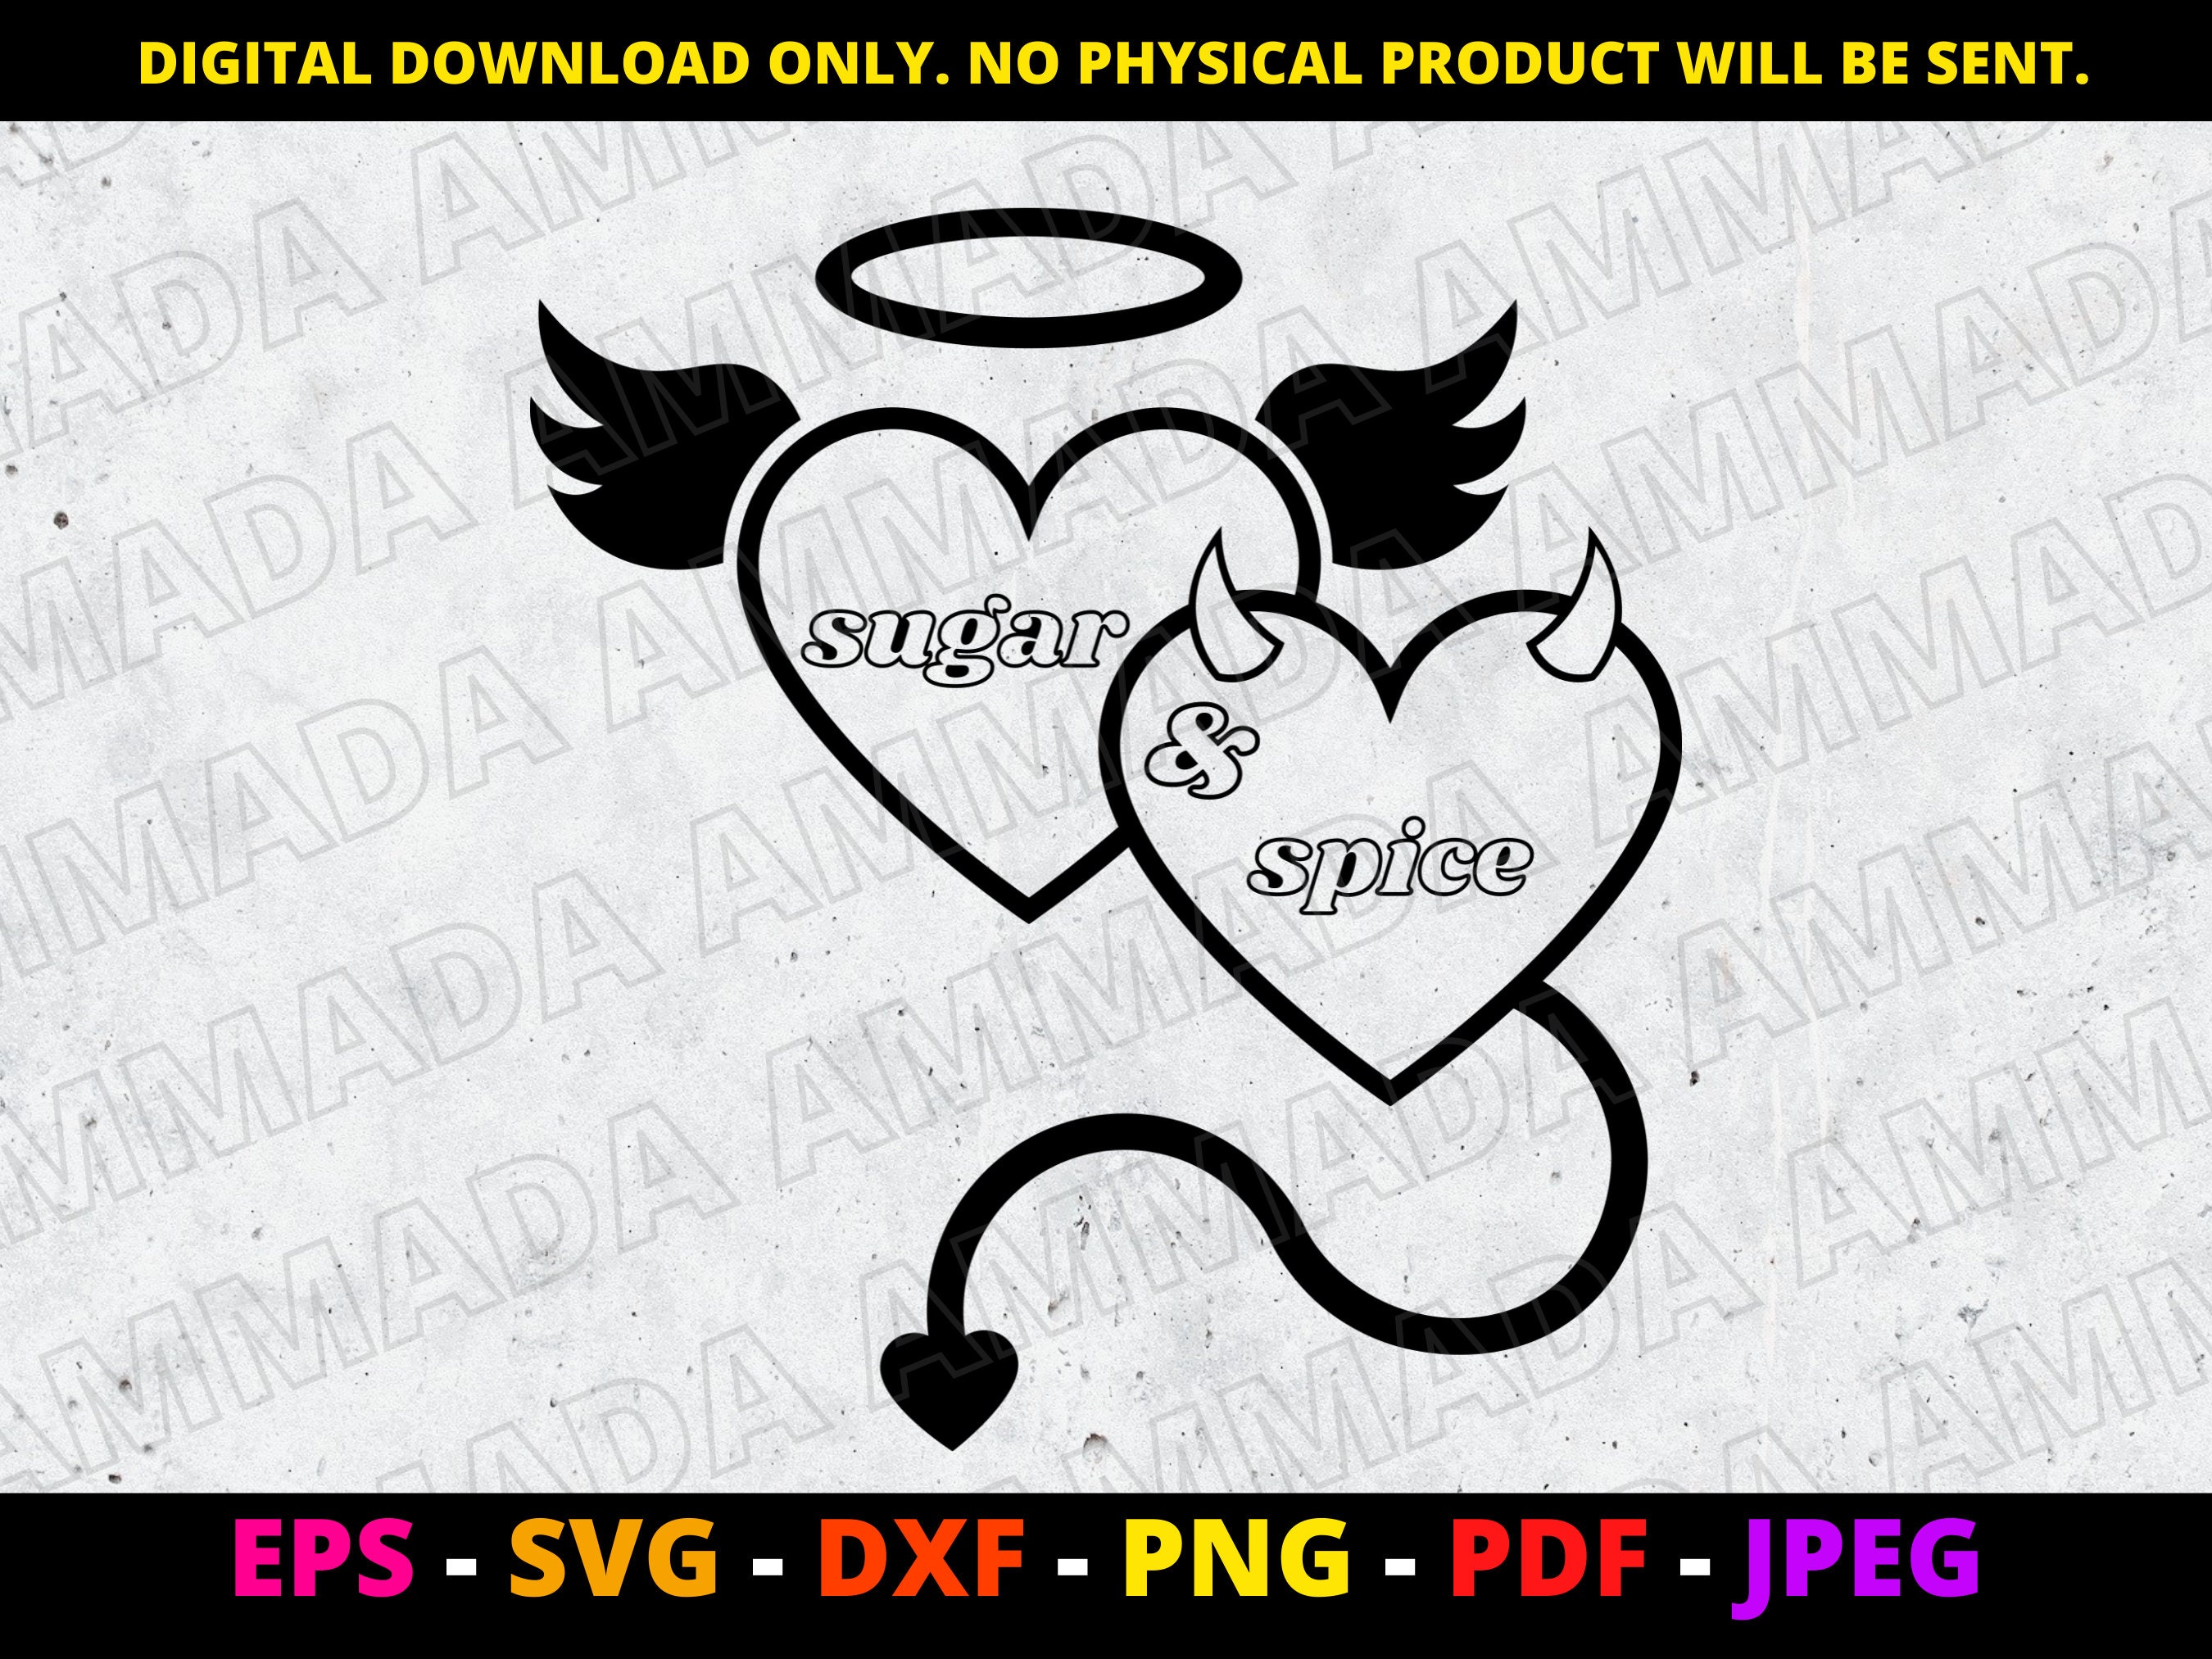 Winged Heart Stickers, Pink Flying Angel Heart With Wings Laptop